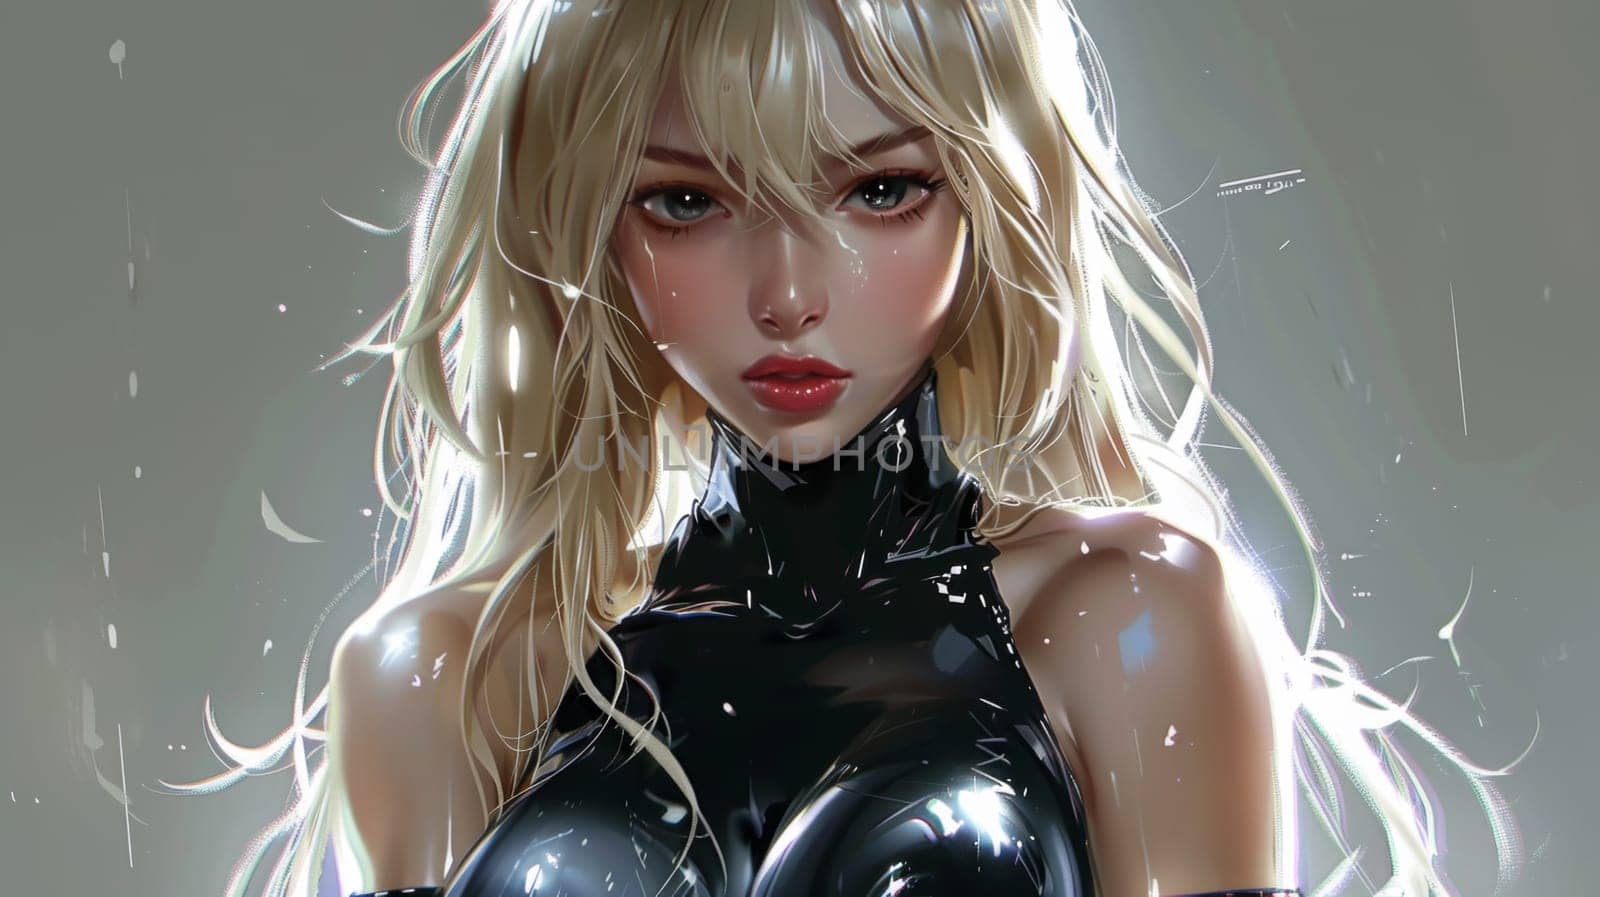 A beautiful woman in a black latex outfit with blonde hair, AI by starush